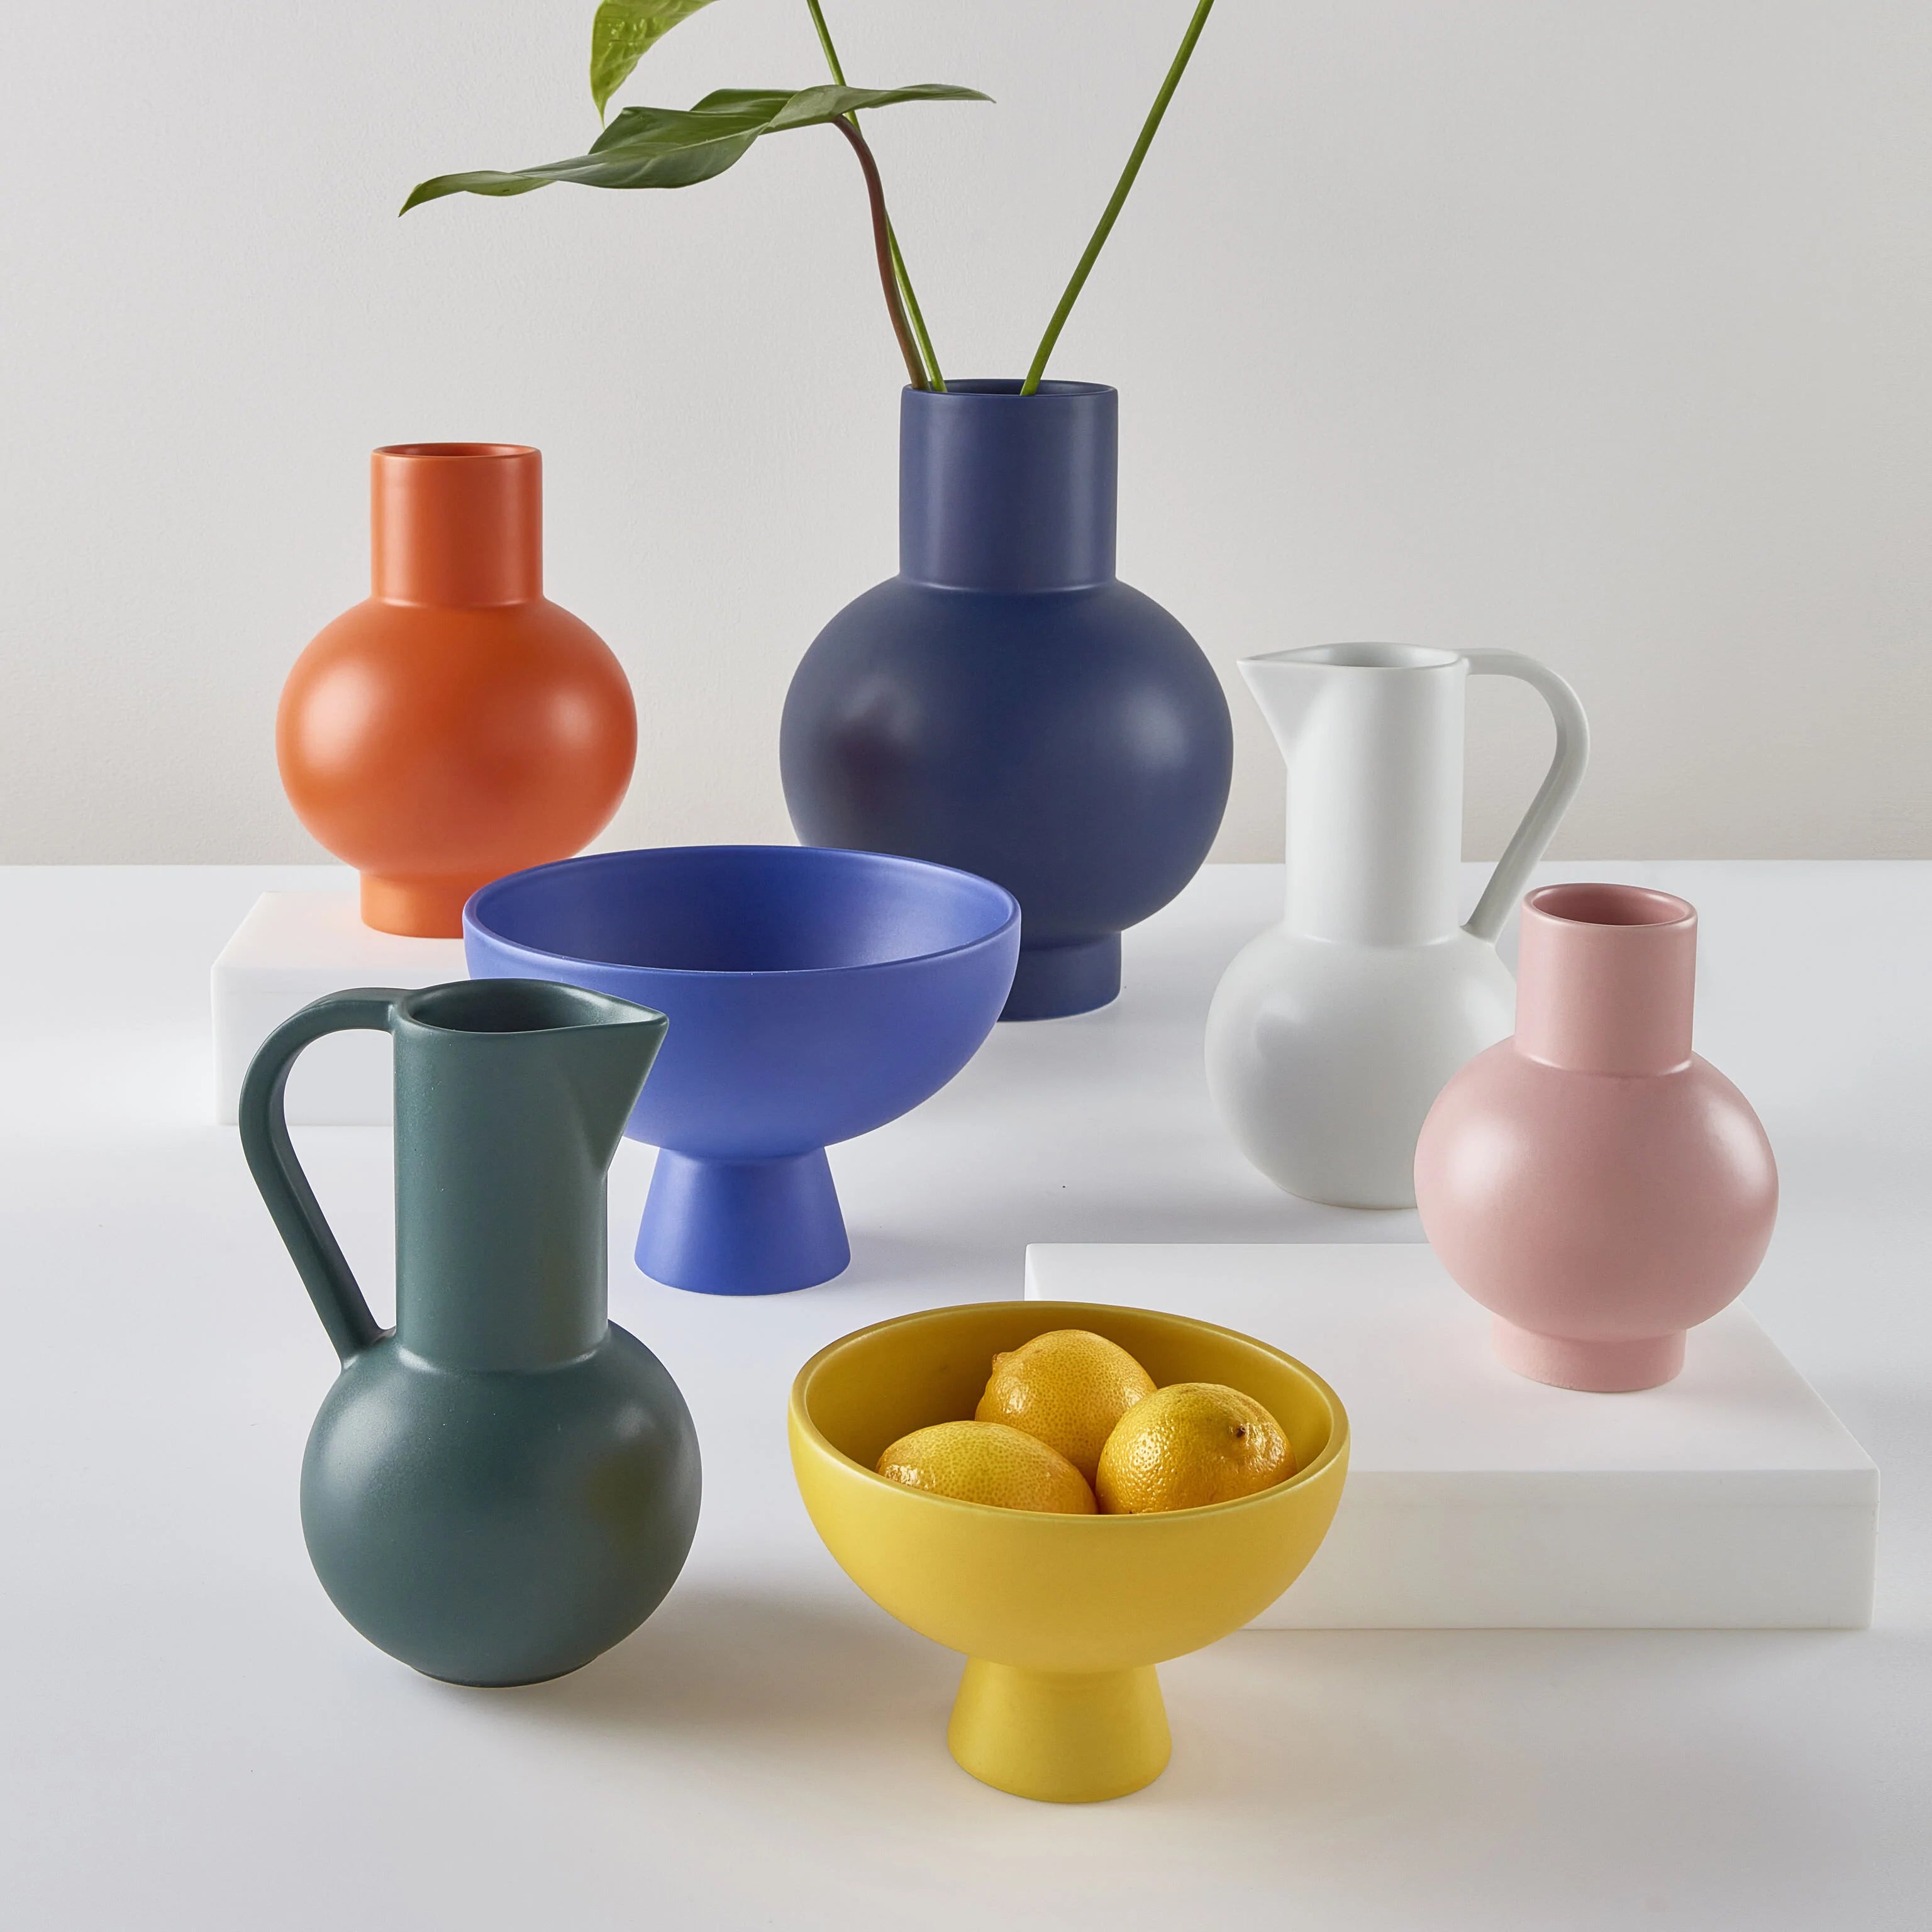 Raawii Jugs, Bowls, Vases by MoMA Design Store